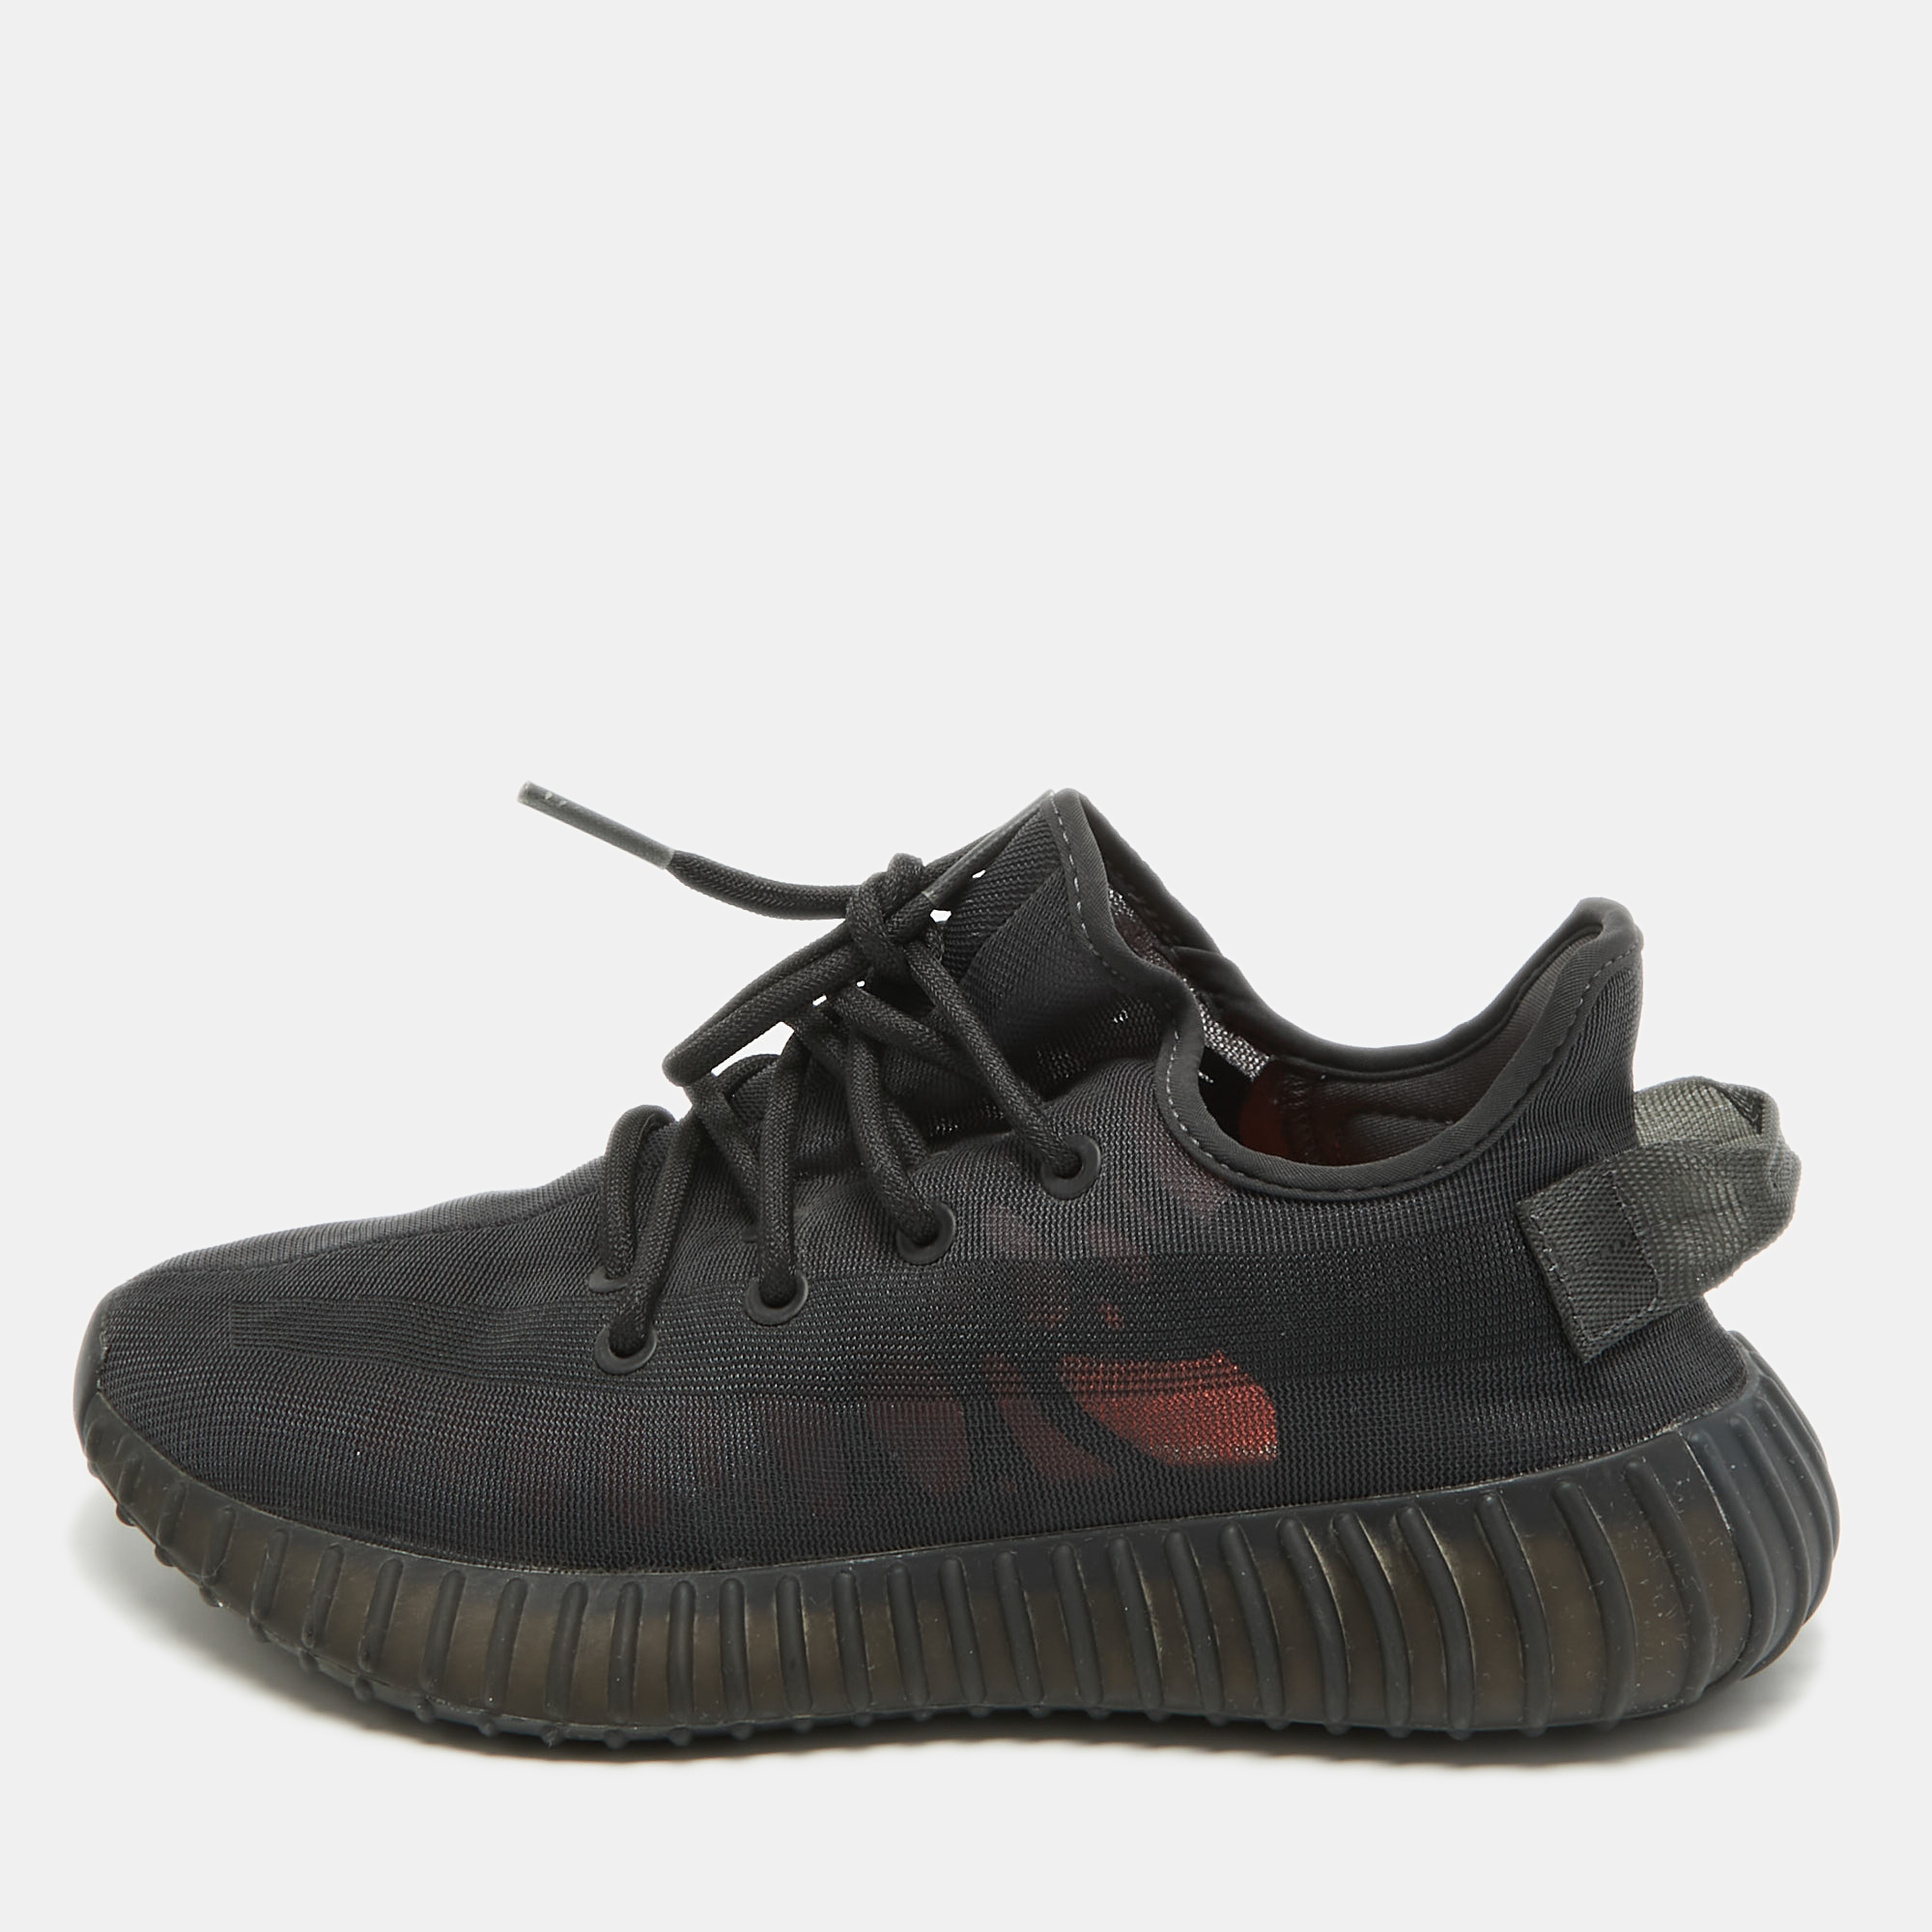 Yeezy x adidas black mesh boost 350 v2 cinder sneakers size 38 1/3